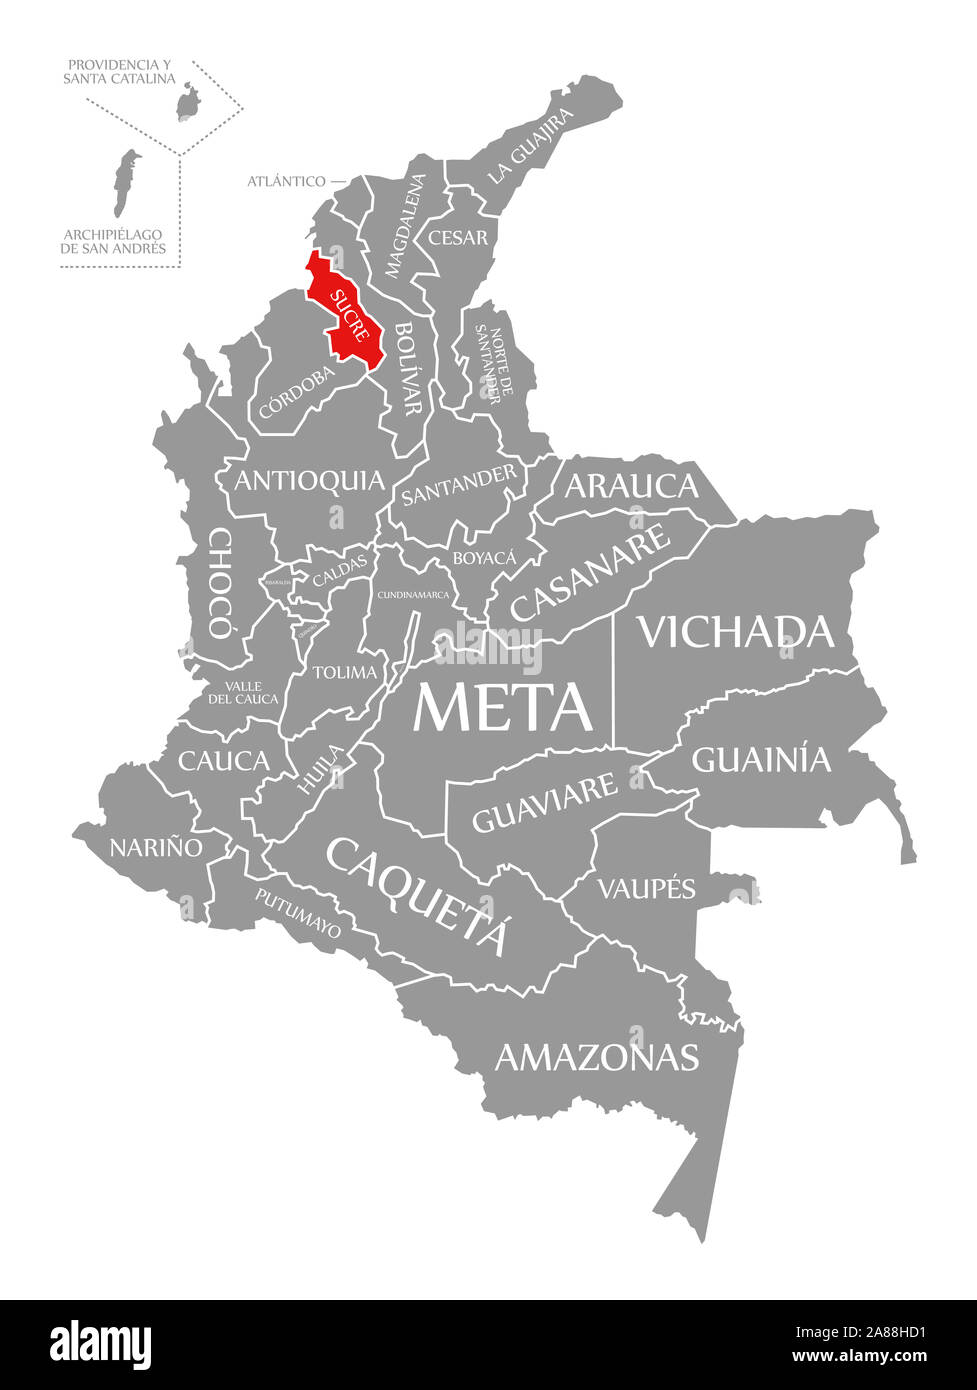 Sucre red highlighted in map of Colombia Stock Photo